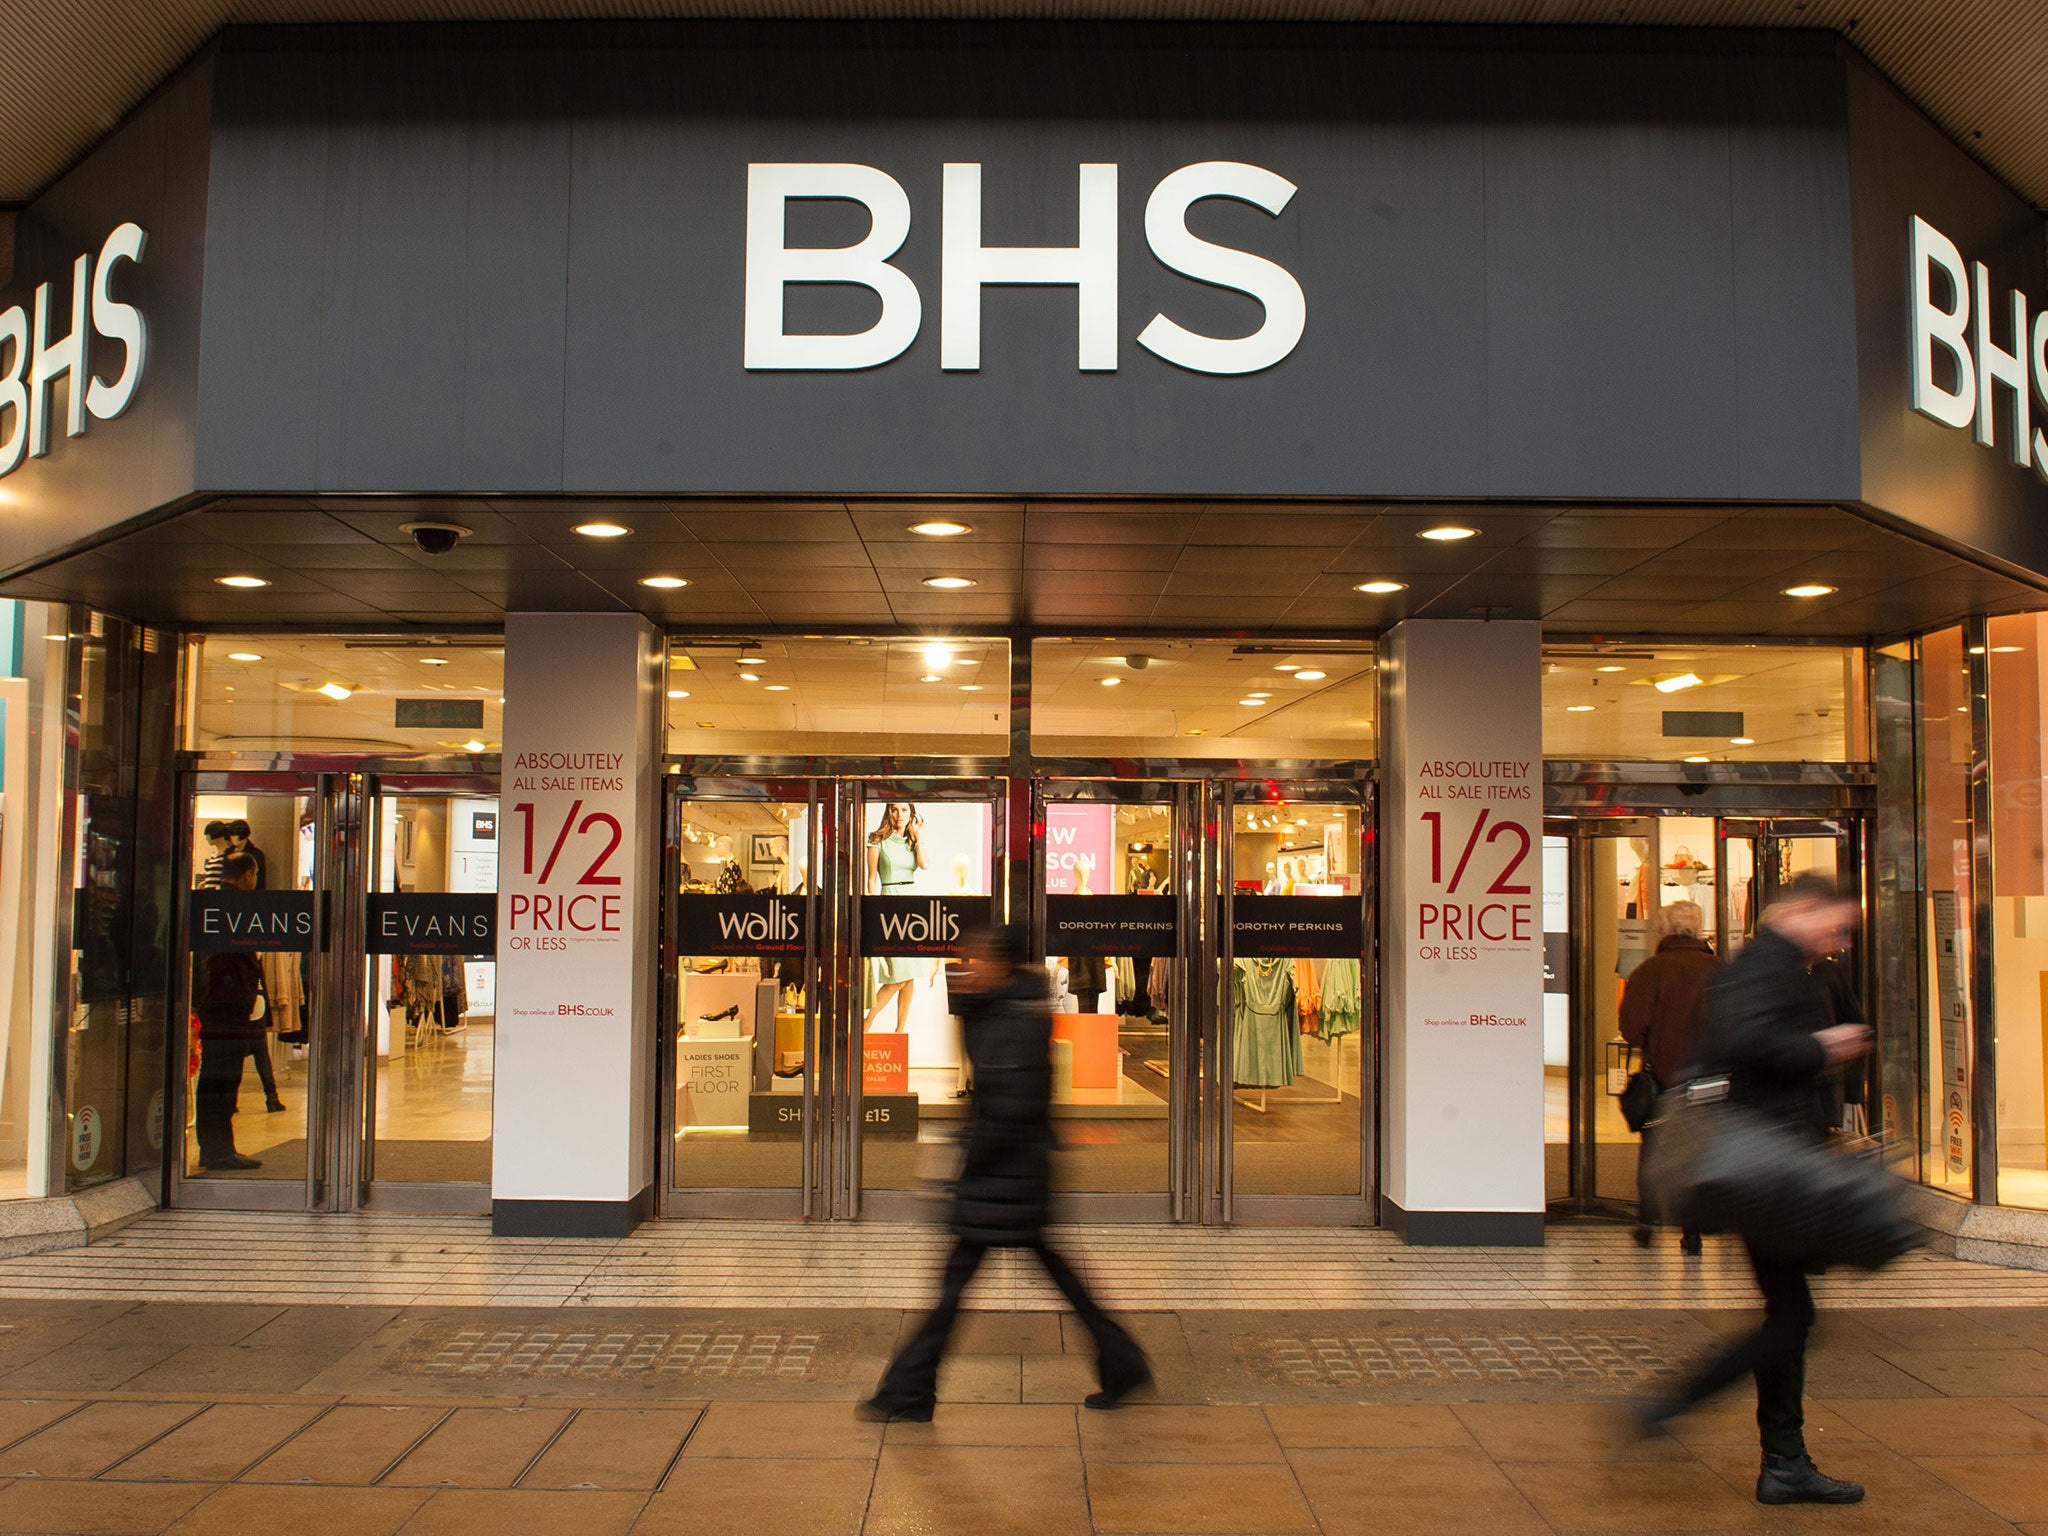 Thousands of jobs at risk as BHS threatens to close half its stores | The Independent